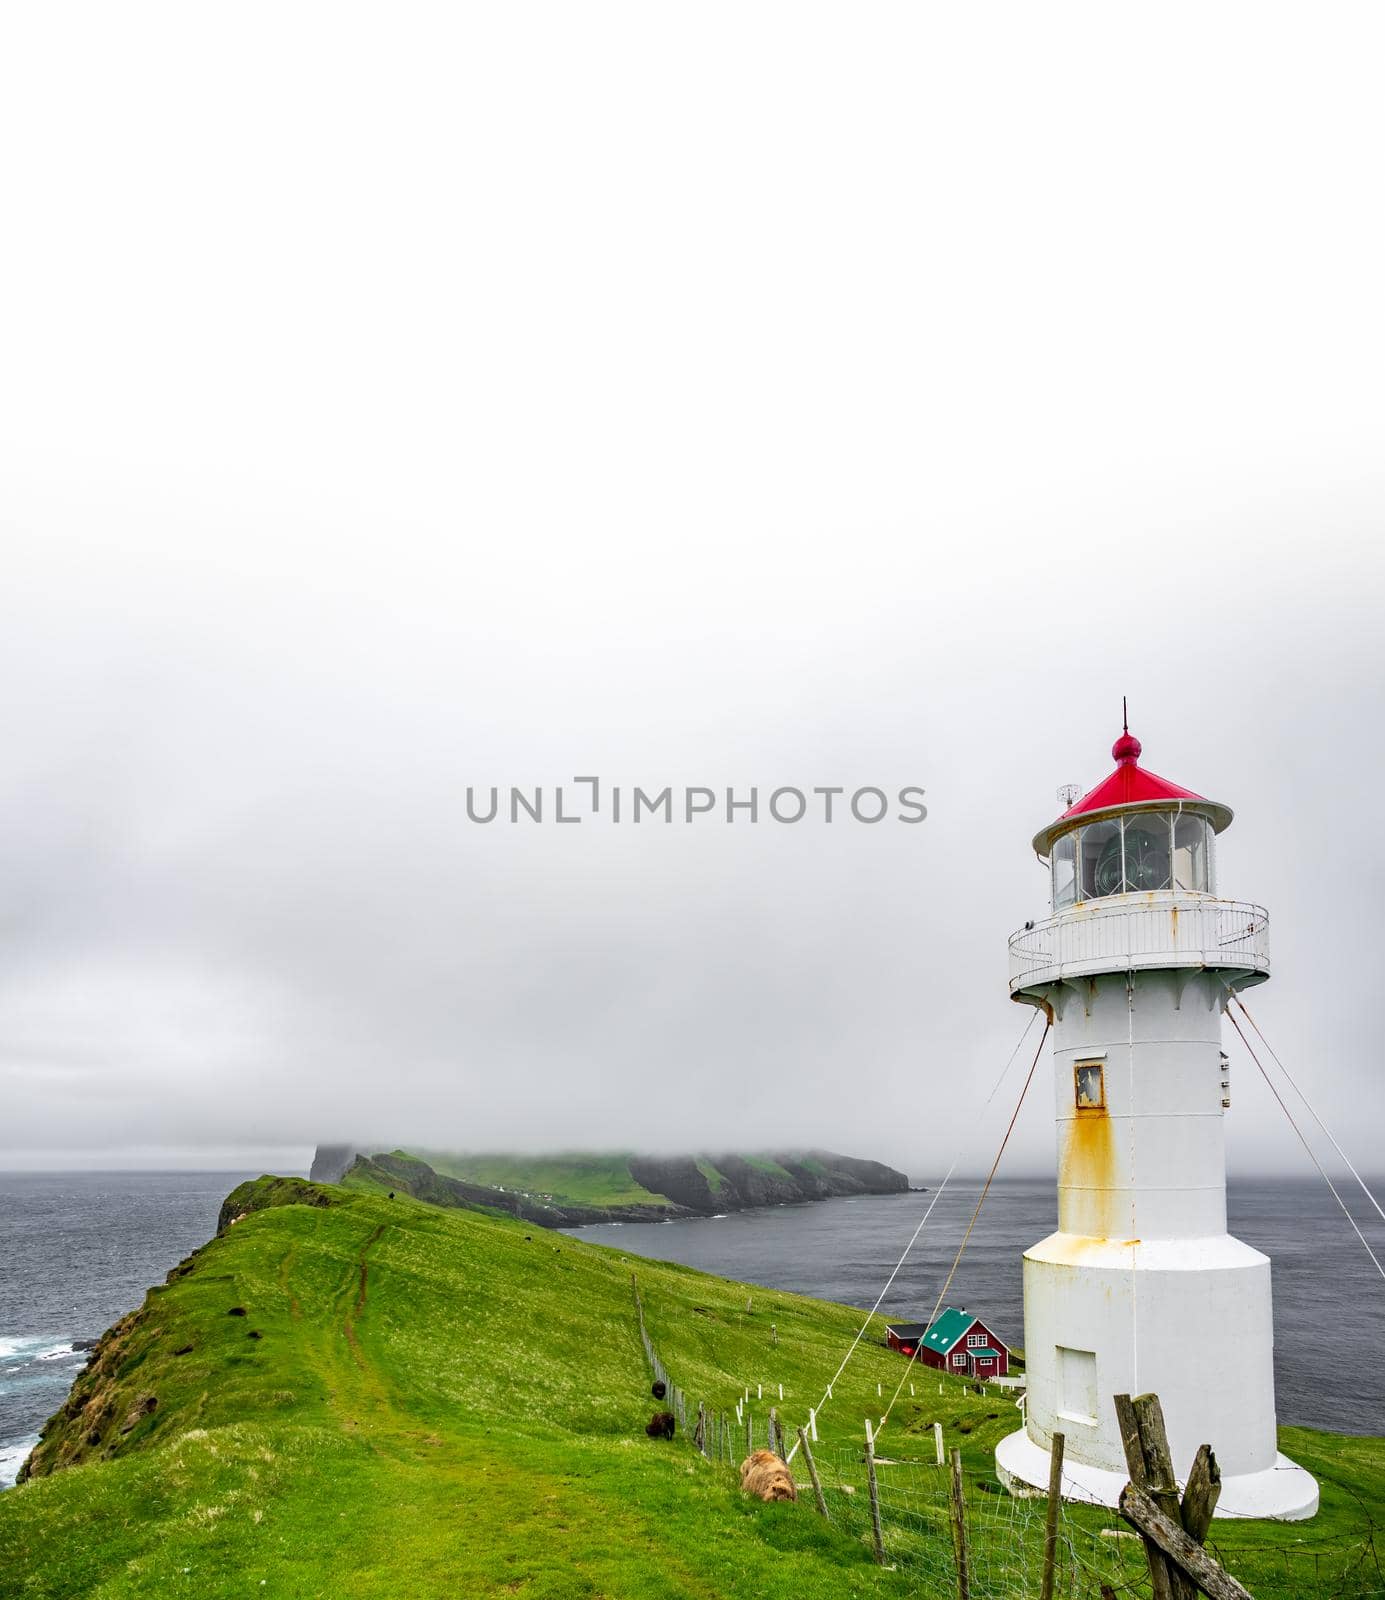 Lighthouse at the end of the island under white sky for text space